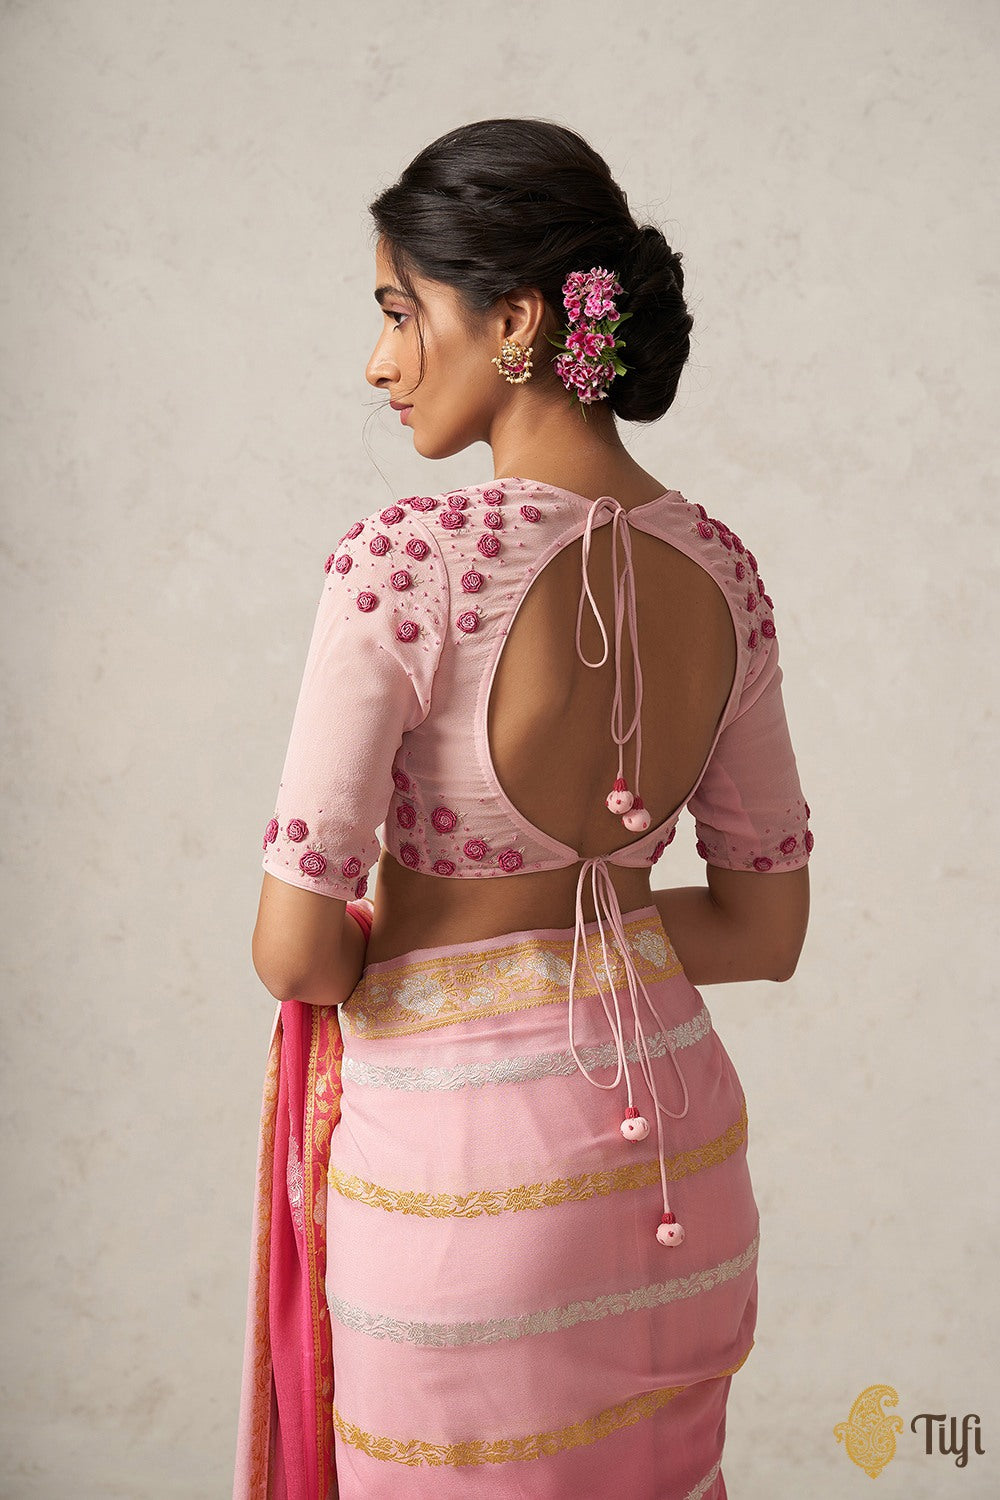 Chalk Pink hand embroidered phool guchha saree with bralet blouse Design by  DeepThee at Modvey